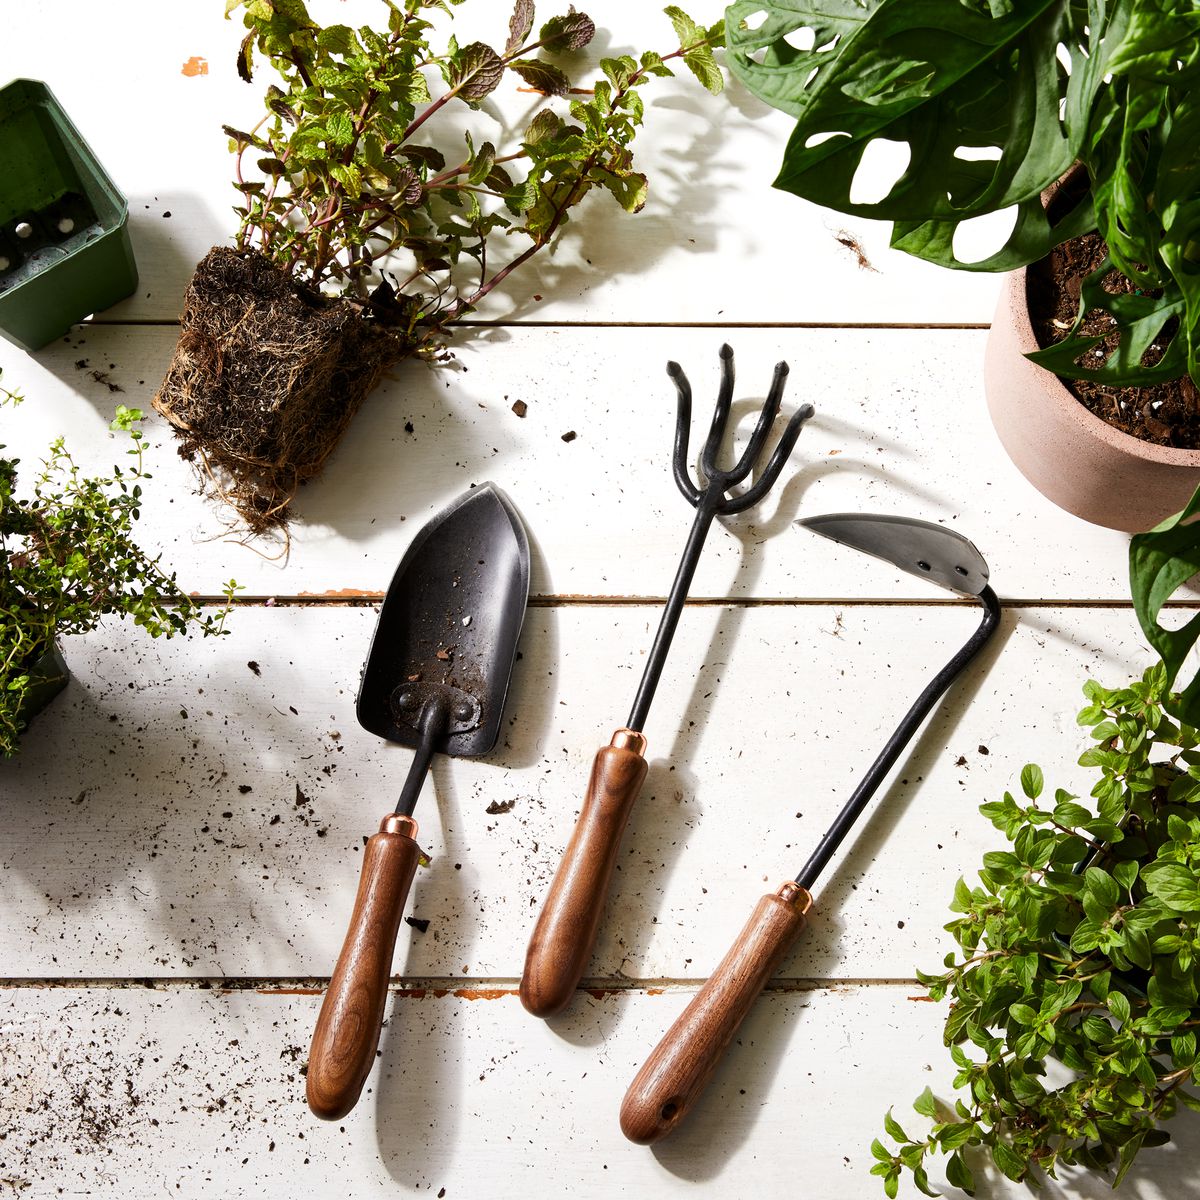 20 Best Gardening Tools 20 from Plant Tarps to Watering Wands